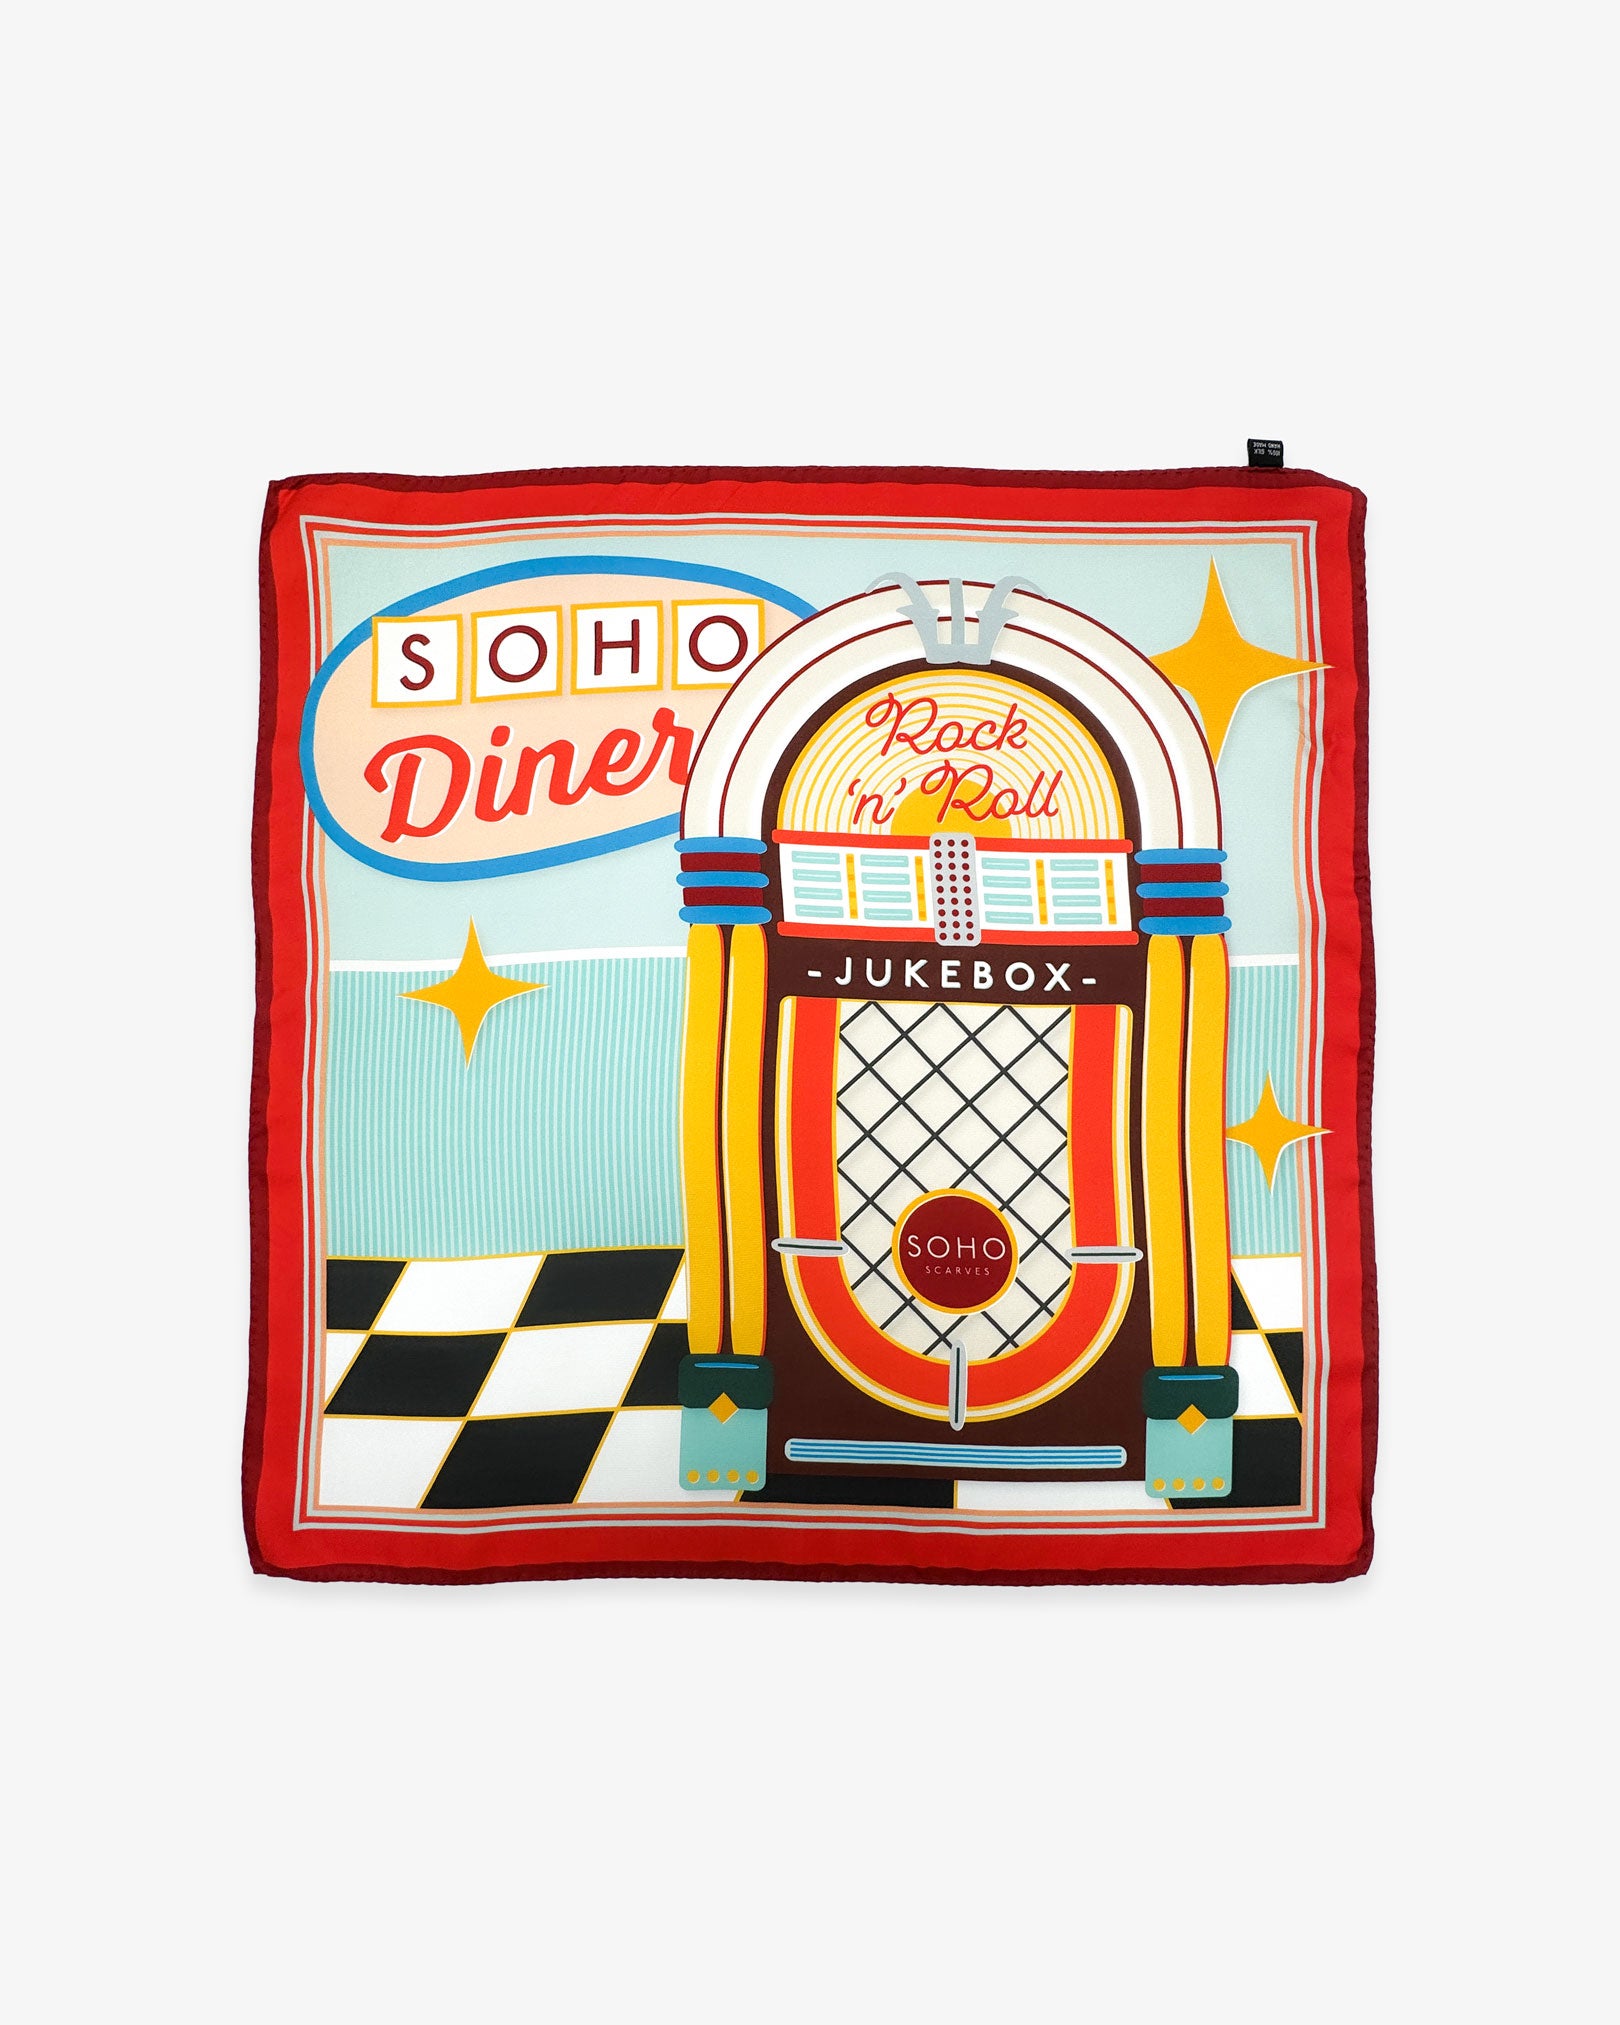 Fully unfolded 'Jukebox 2' silk neckerchief, showing the 1950's jukebox, chequered floor and retro 'SOHO Diner' signage design using a classic 1950's colour palette.